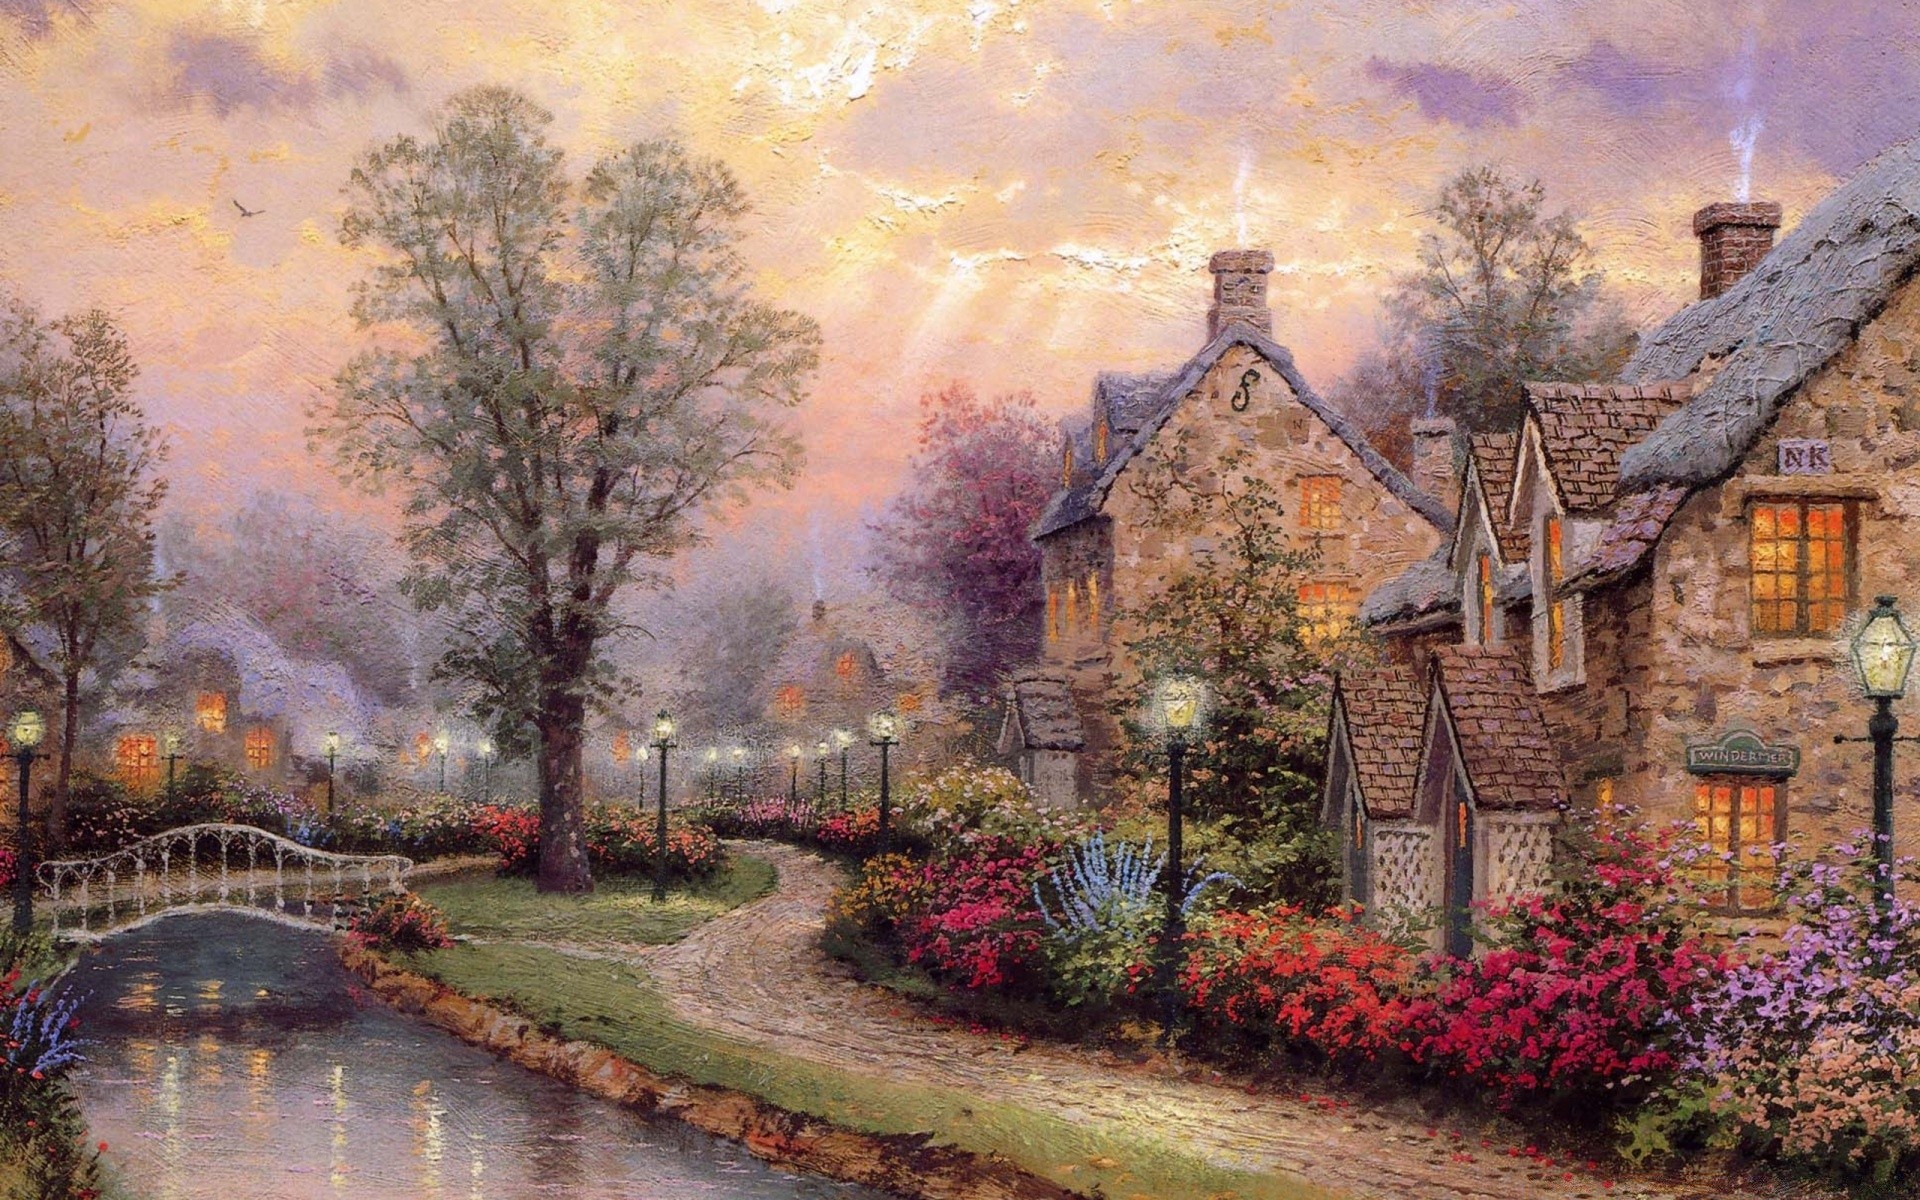 Village Painting by Thomas Kinkade Android wallpapers